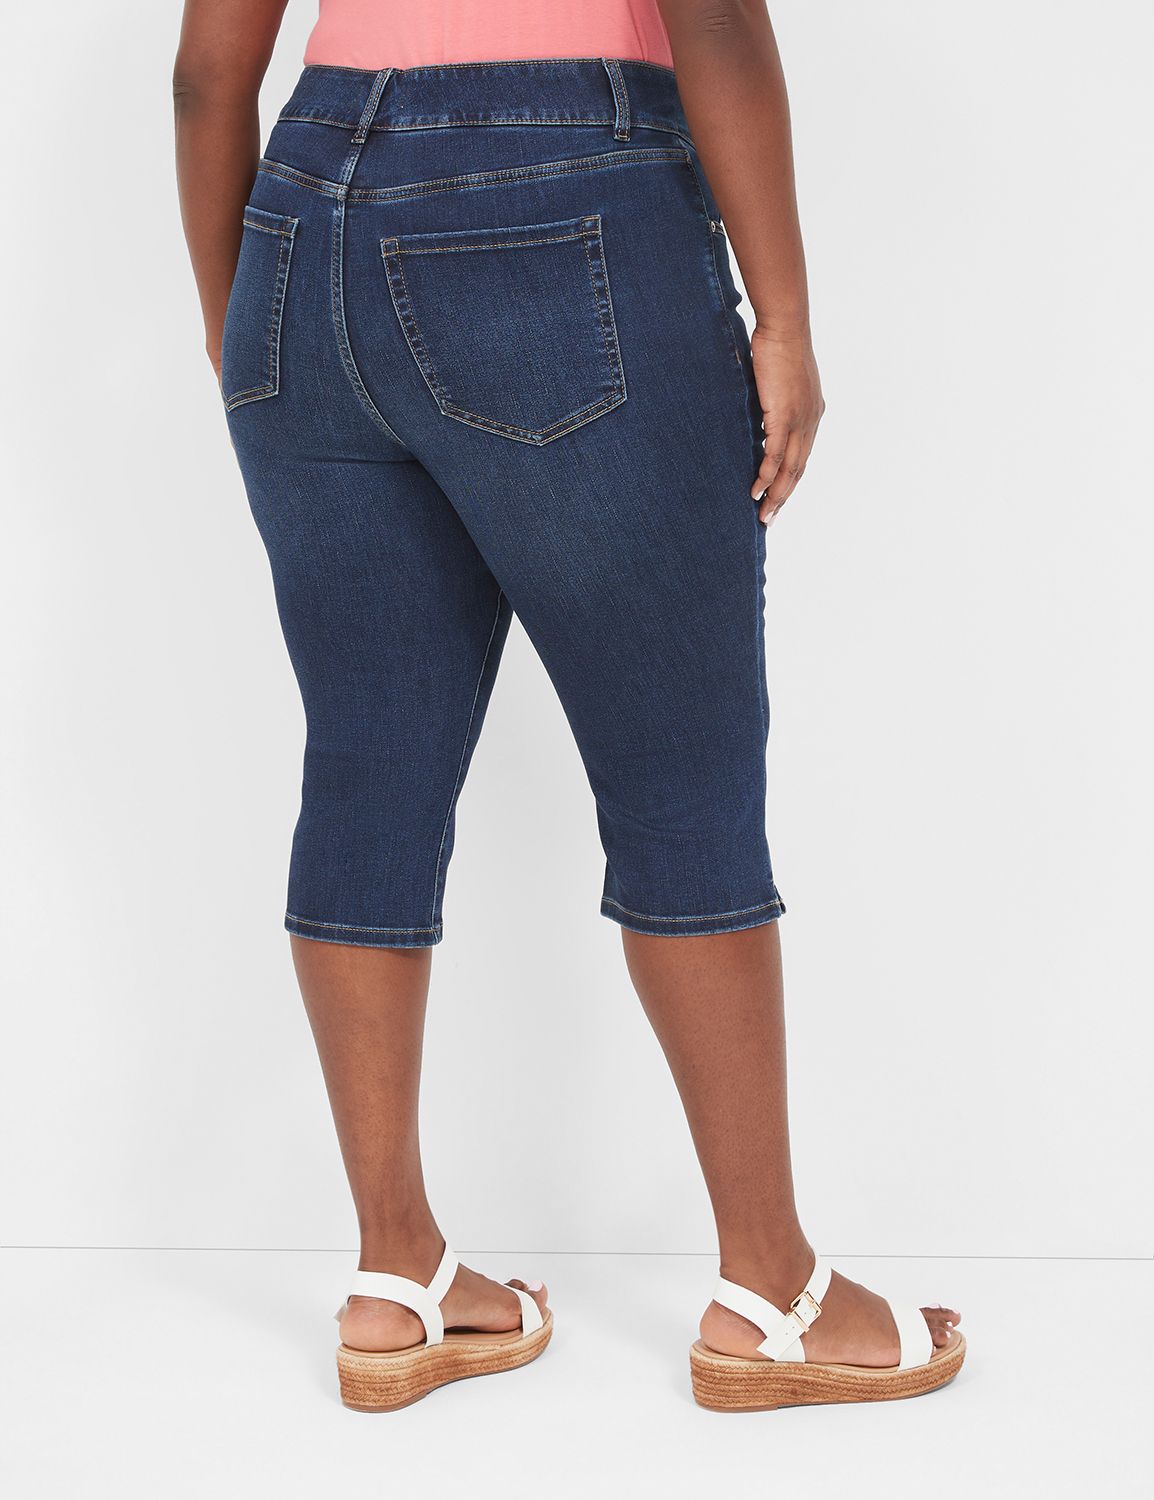 Plus Size Women's Size 12-PETITE Jeans: Skinny, Flare & More